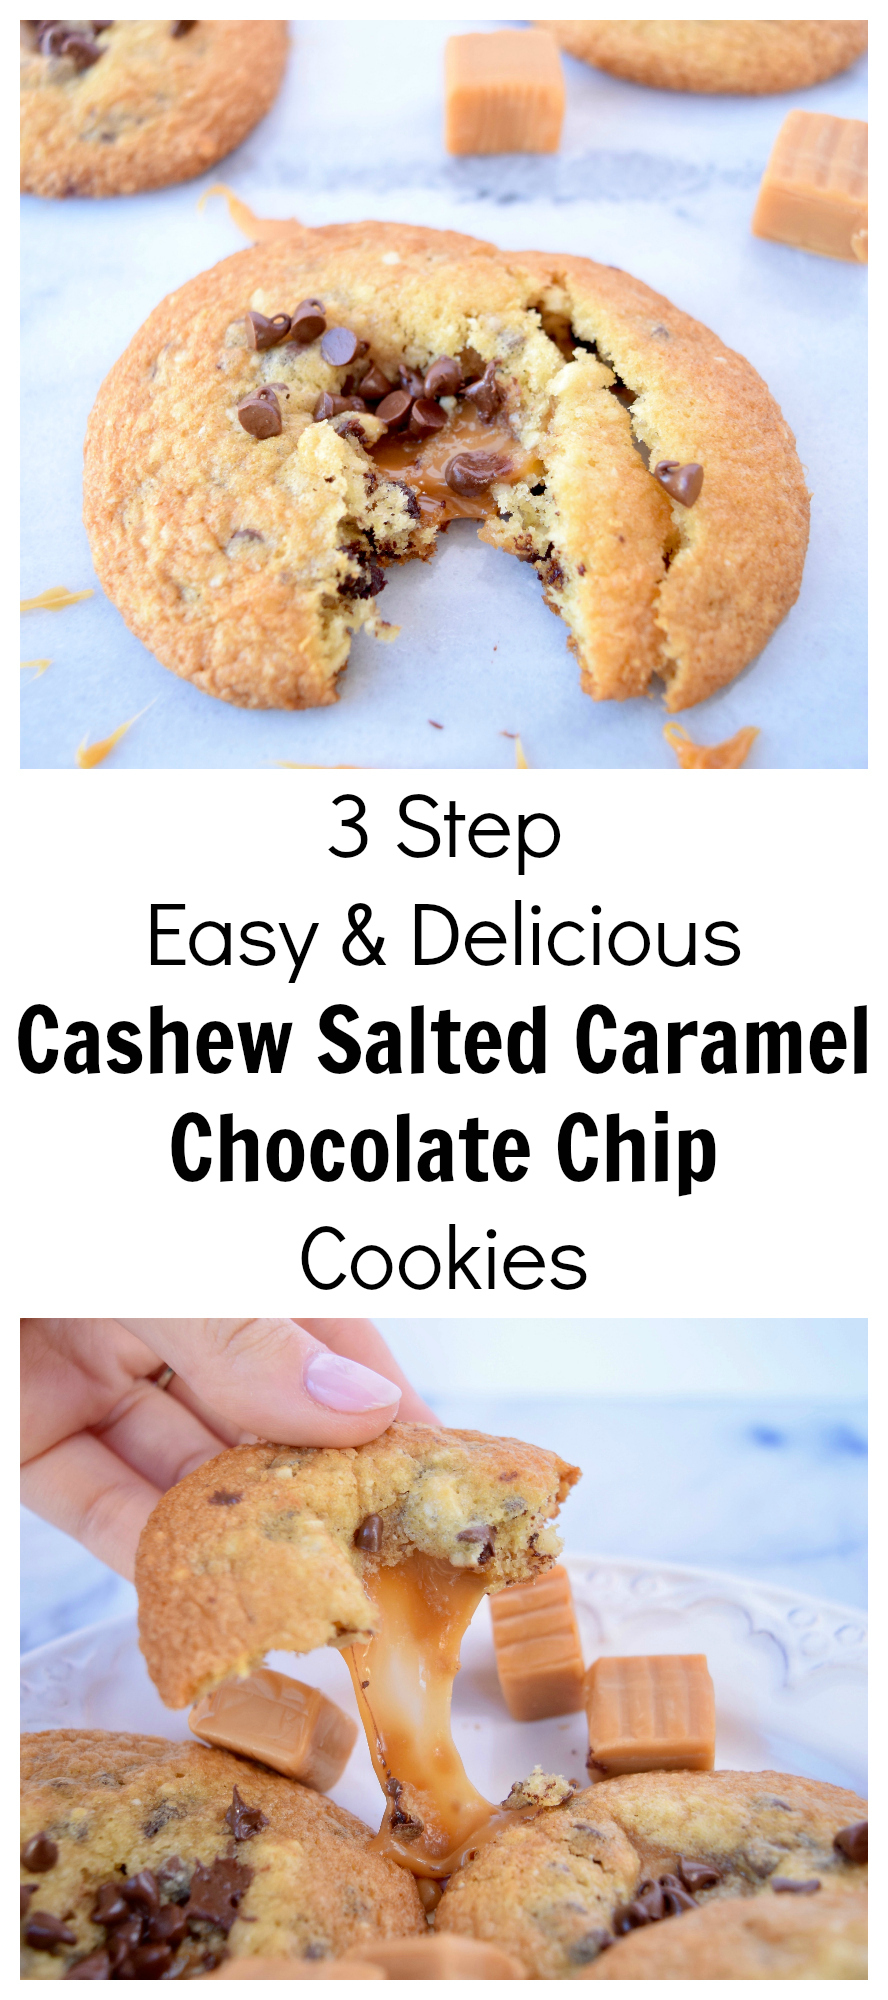 3 Step Easy & Delicious Cashew Salted Caramel Chocolate Chip Cookies